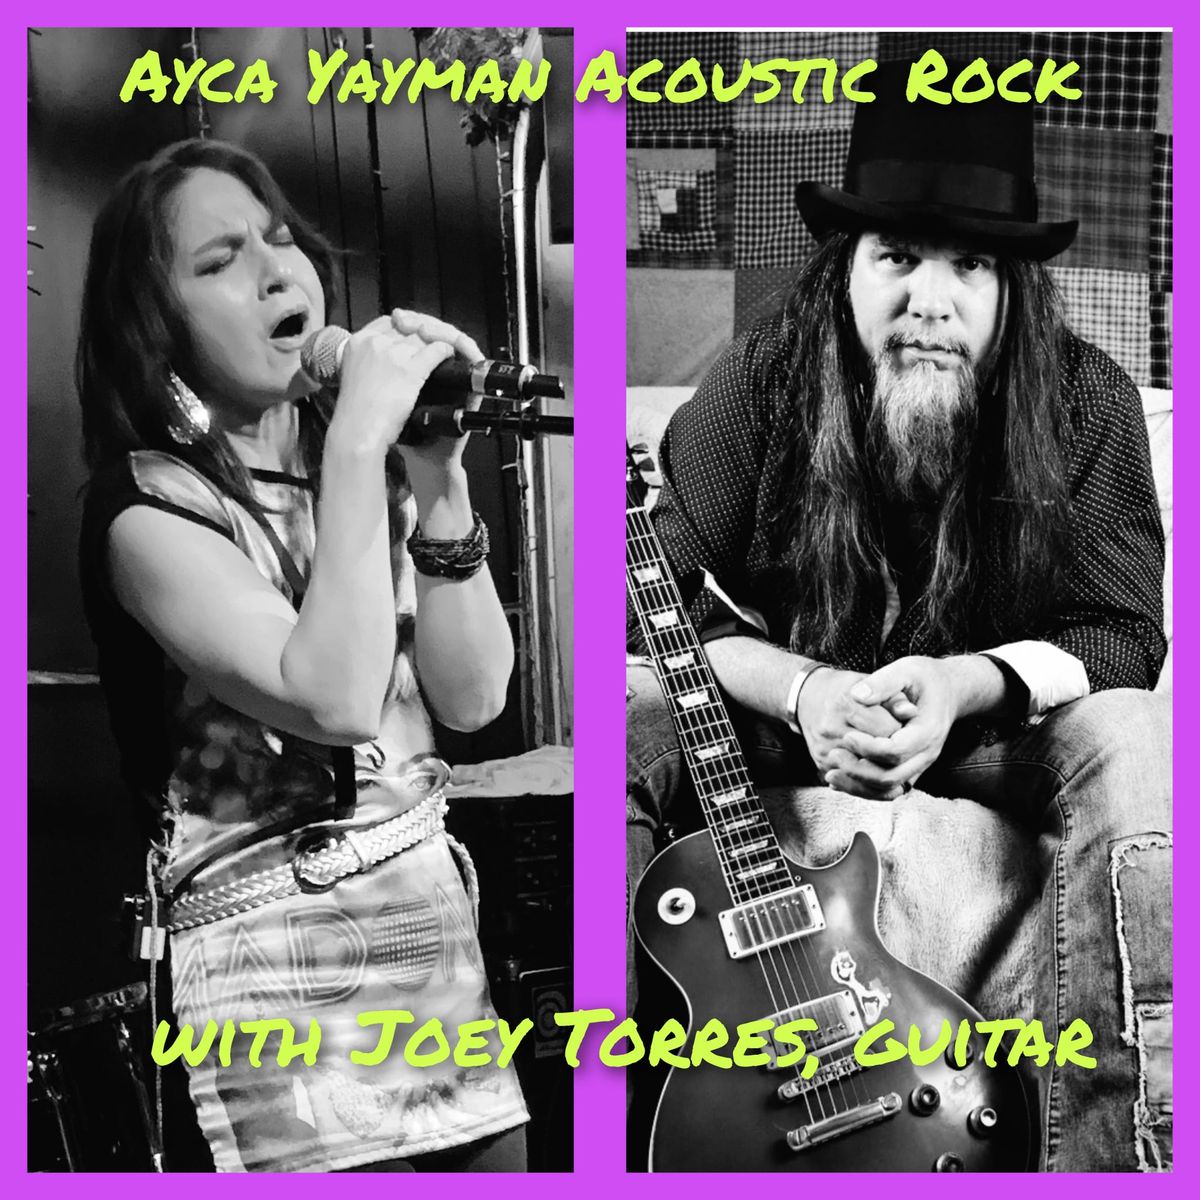 Ayca & Joey Acoustic Rock Duo @ Pour Taproom